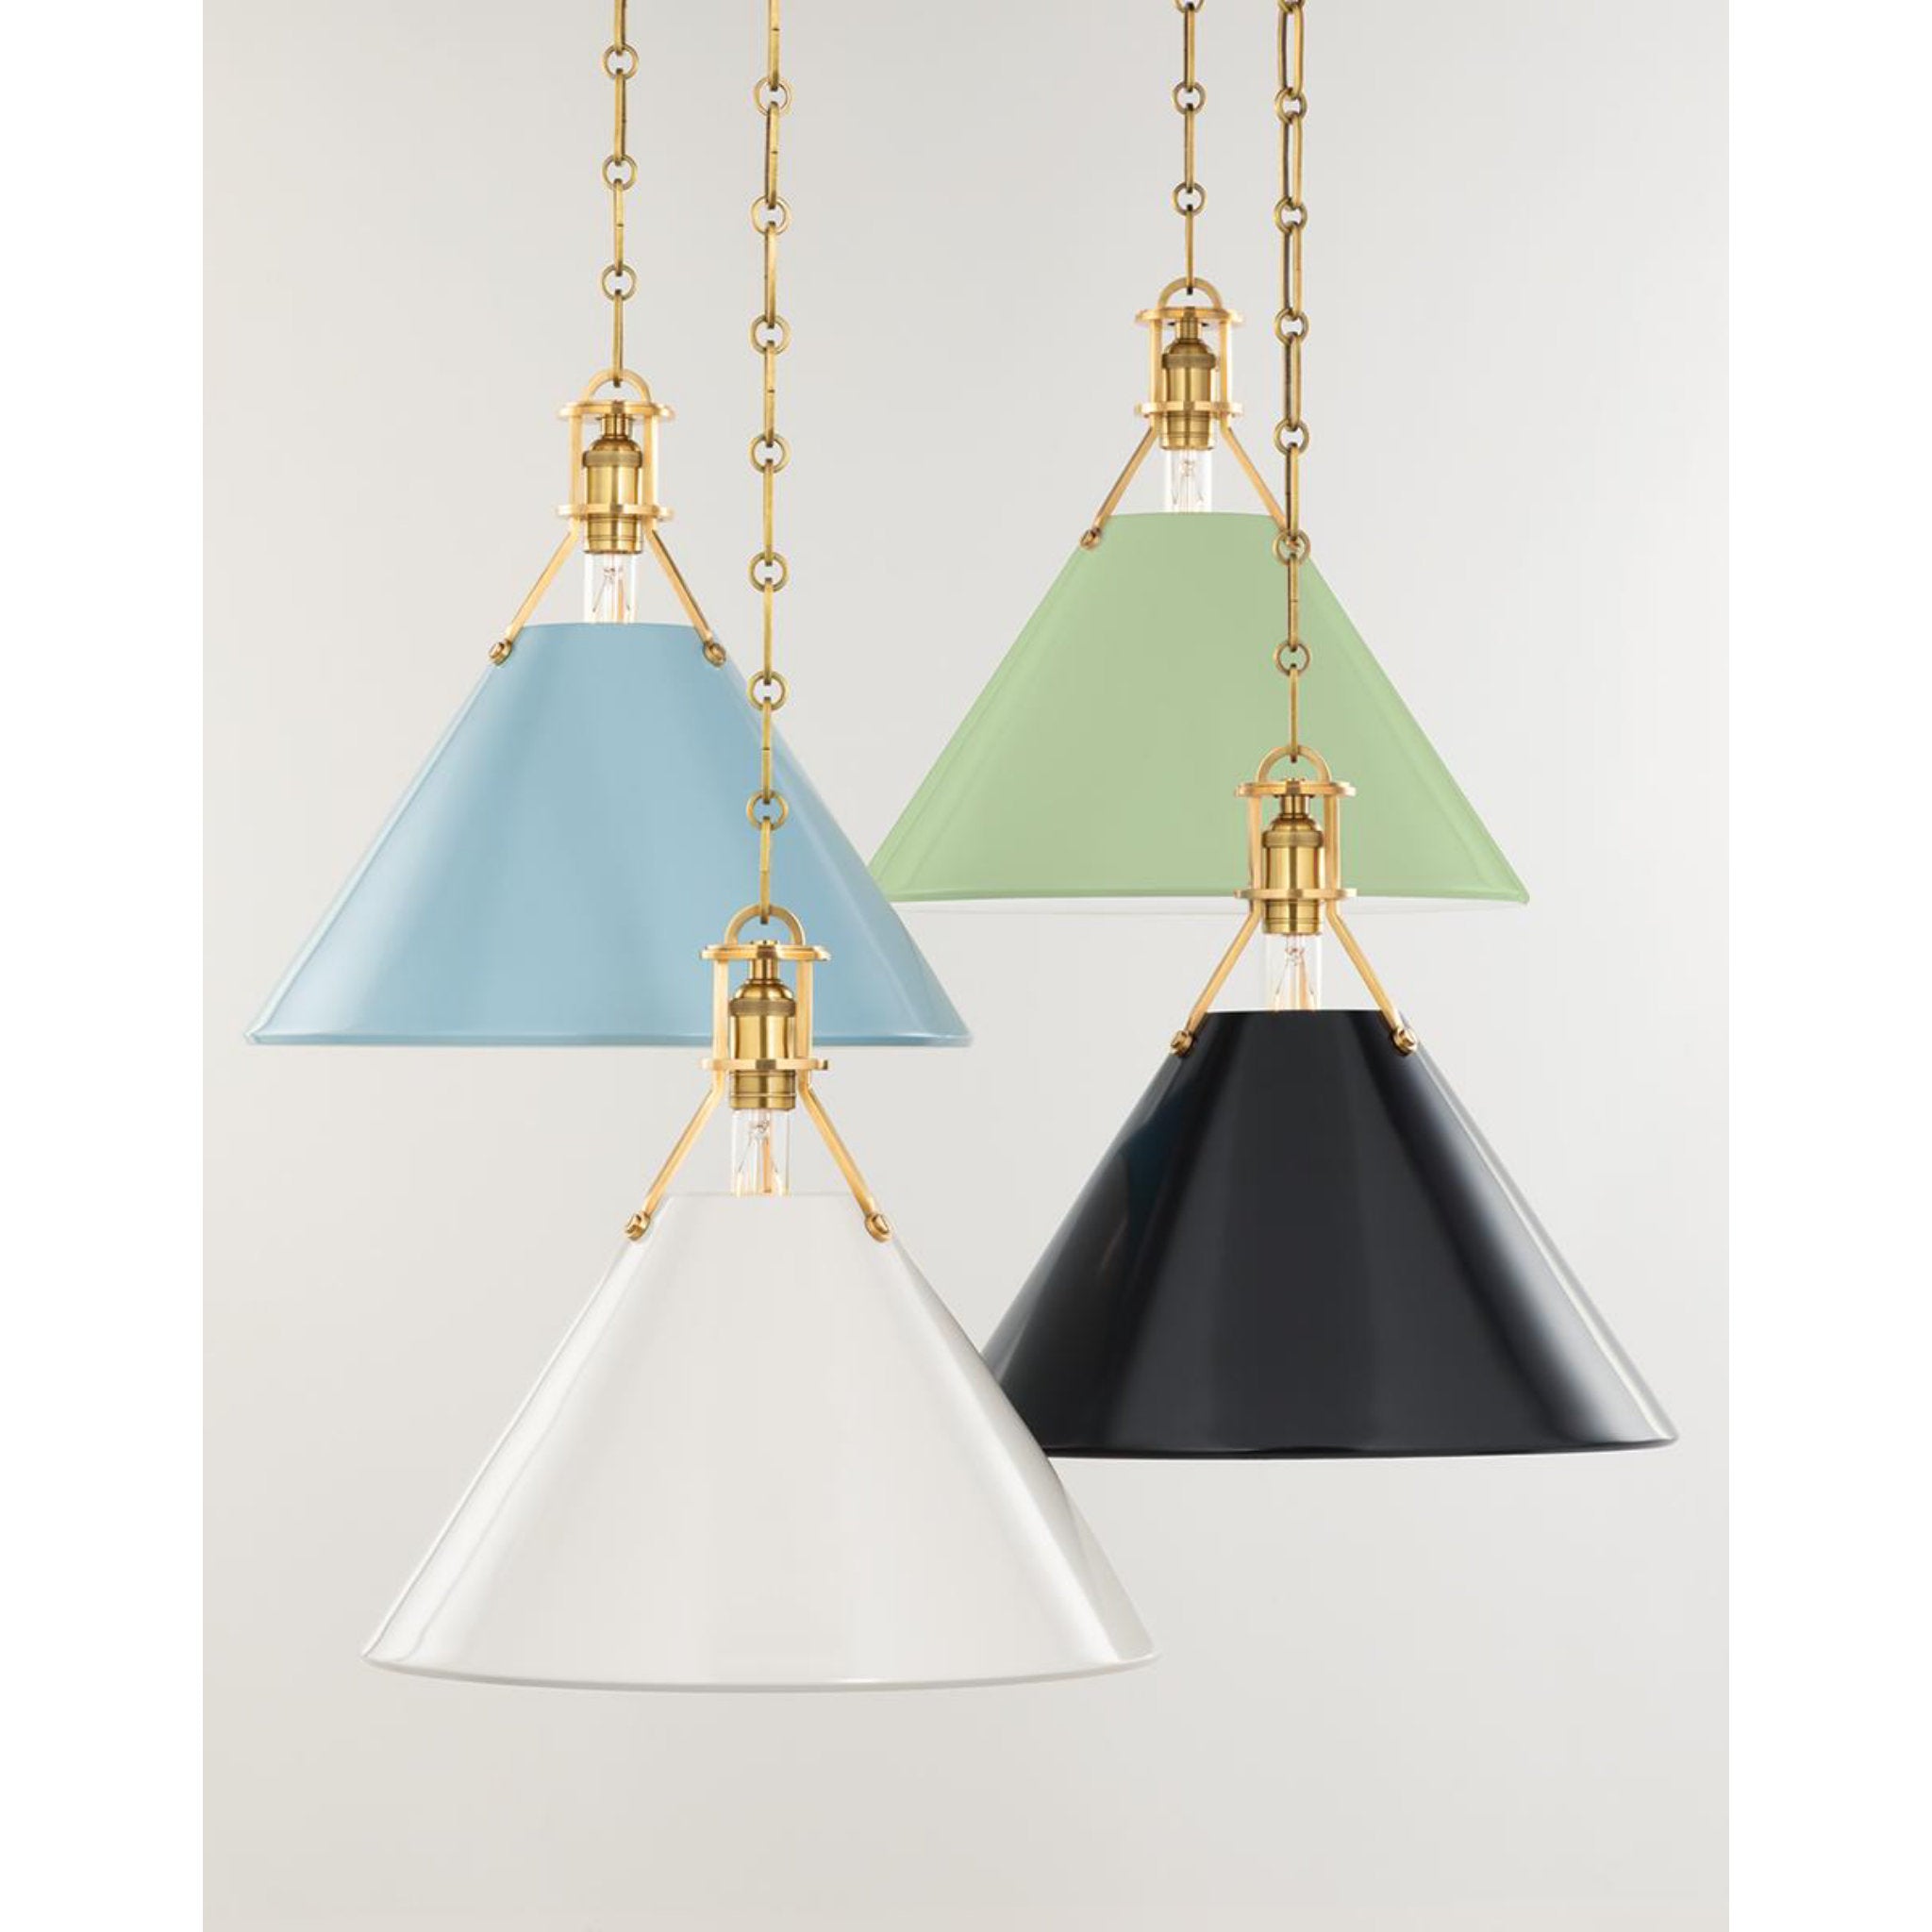 Painted No.2 1 Light Pendant in Polished Nickel/off White by Mark D. Sikes